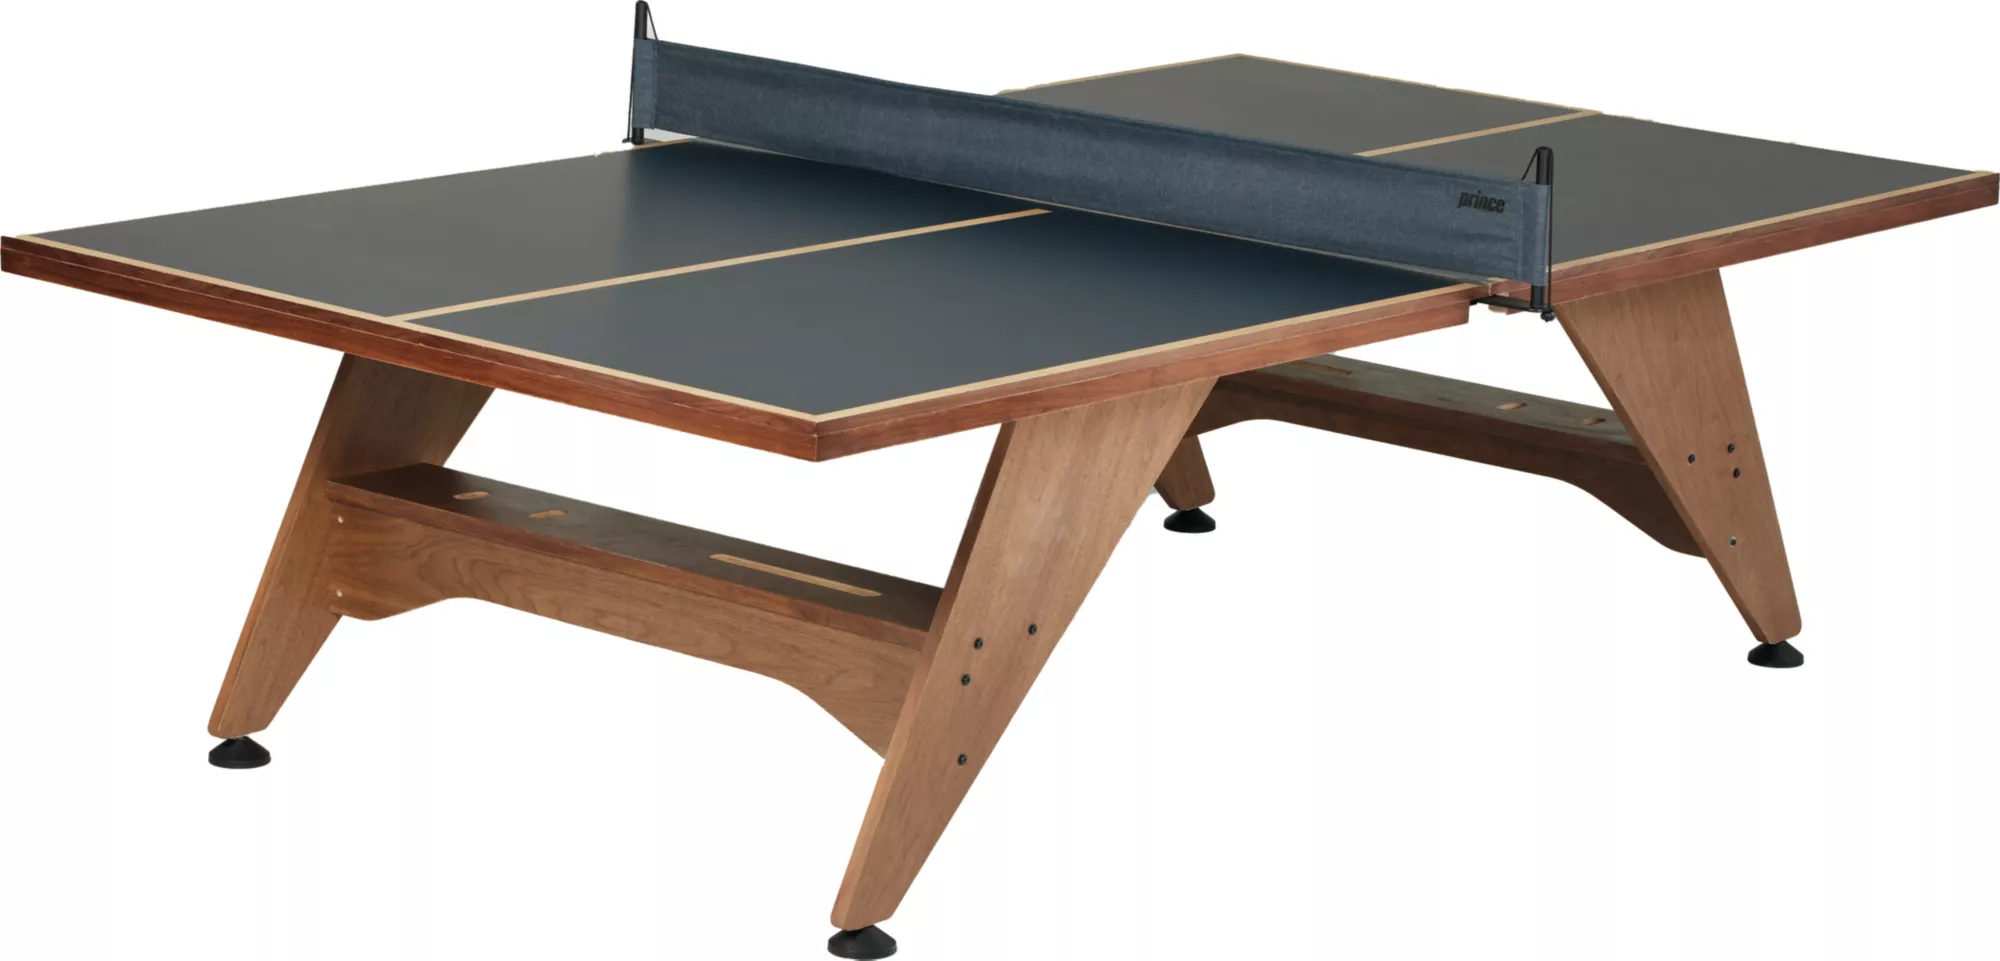 How to Choose a Table Tennis Table